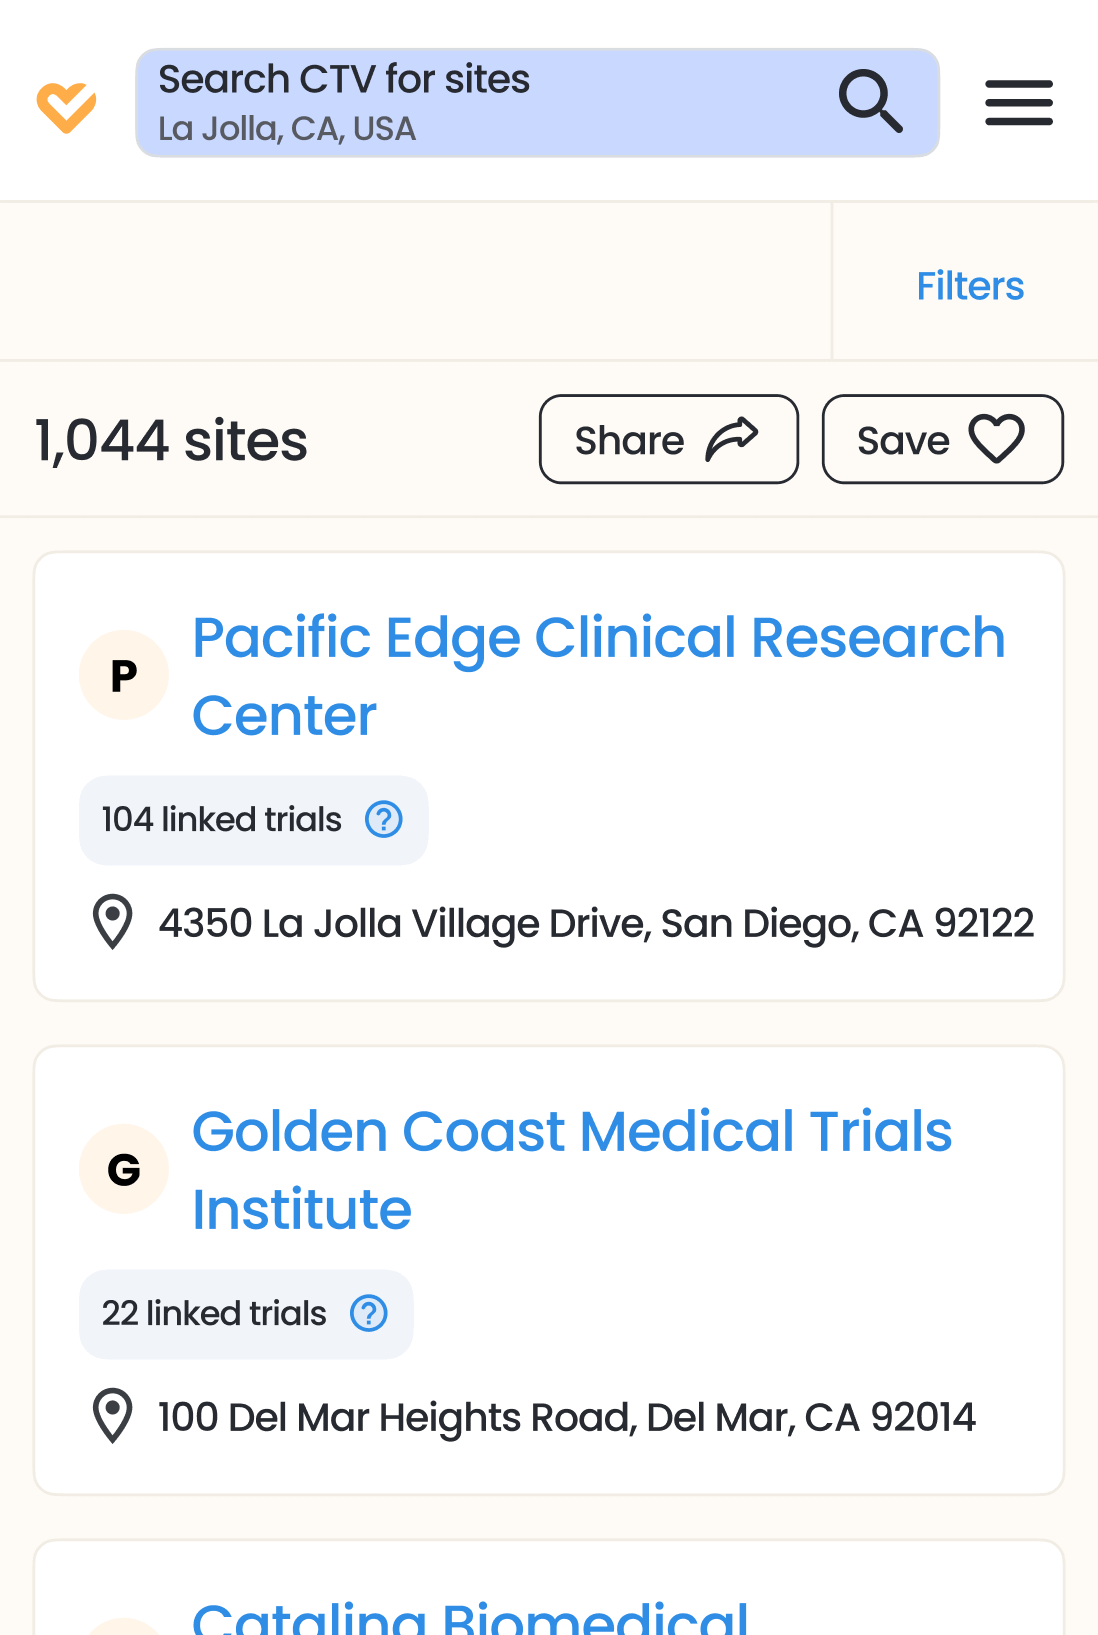 Screenshot of site search results